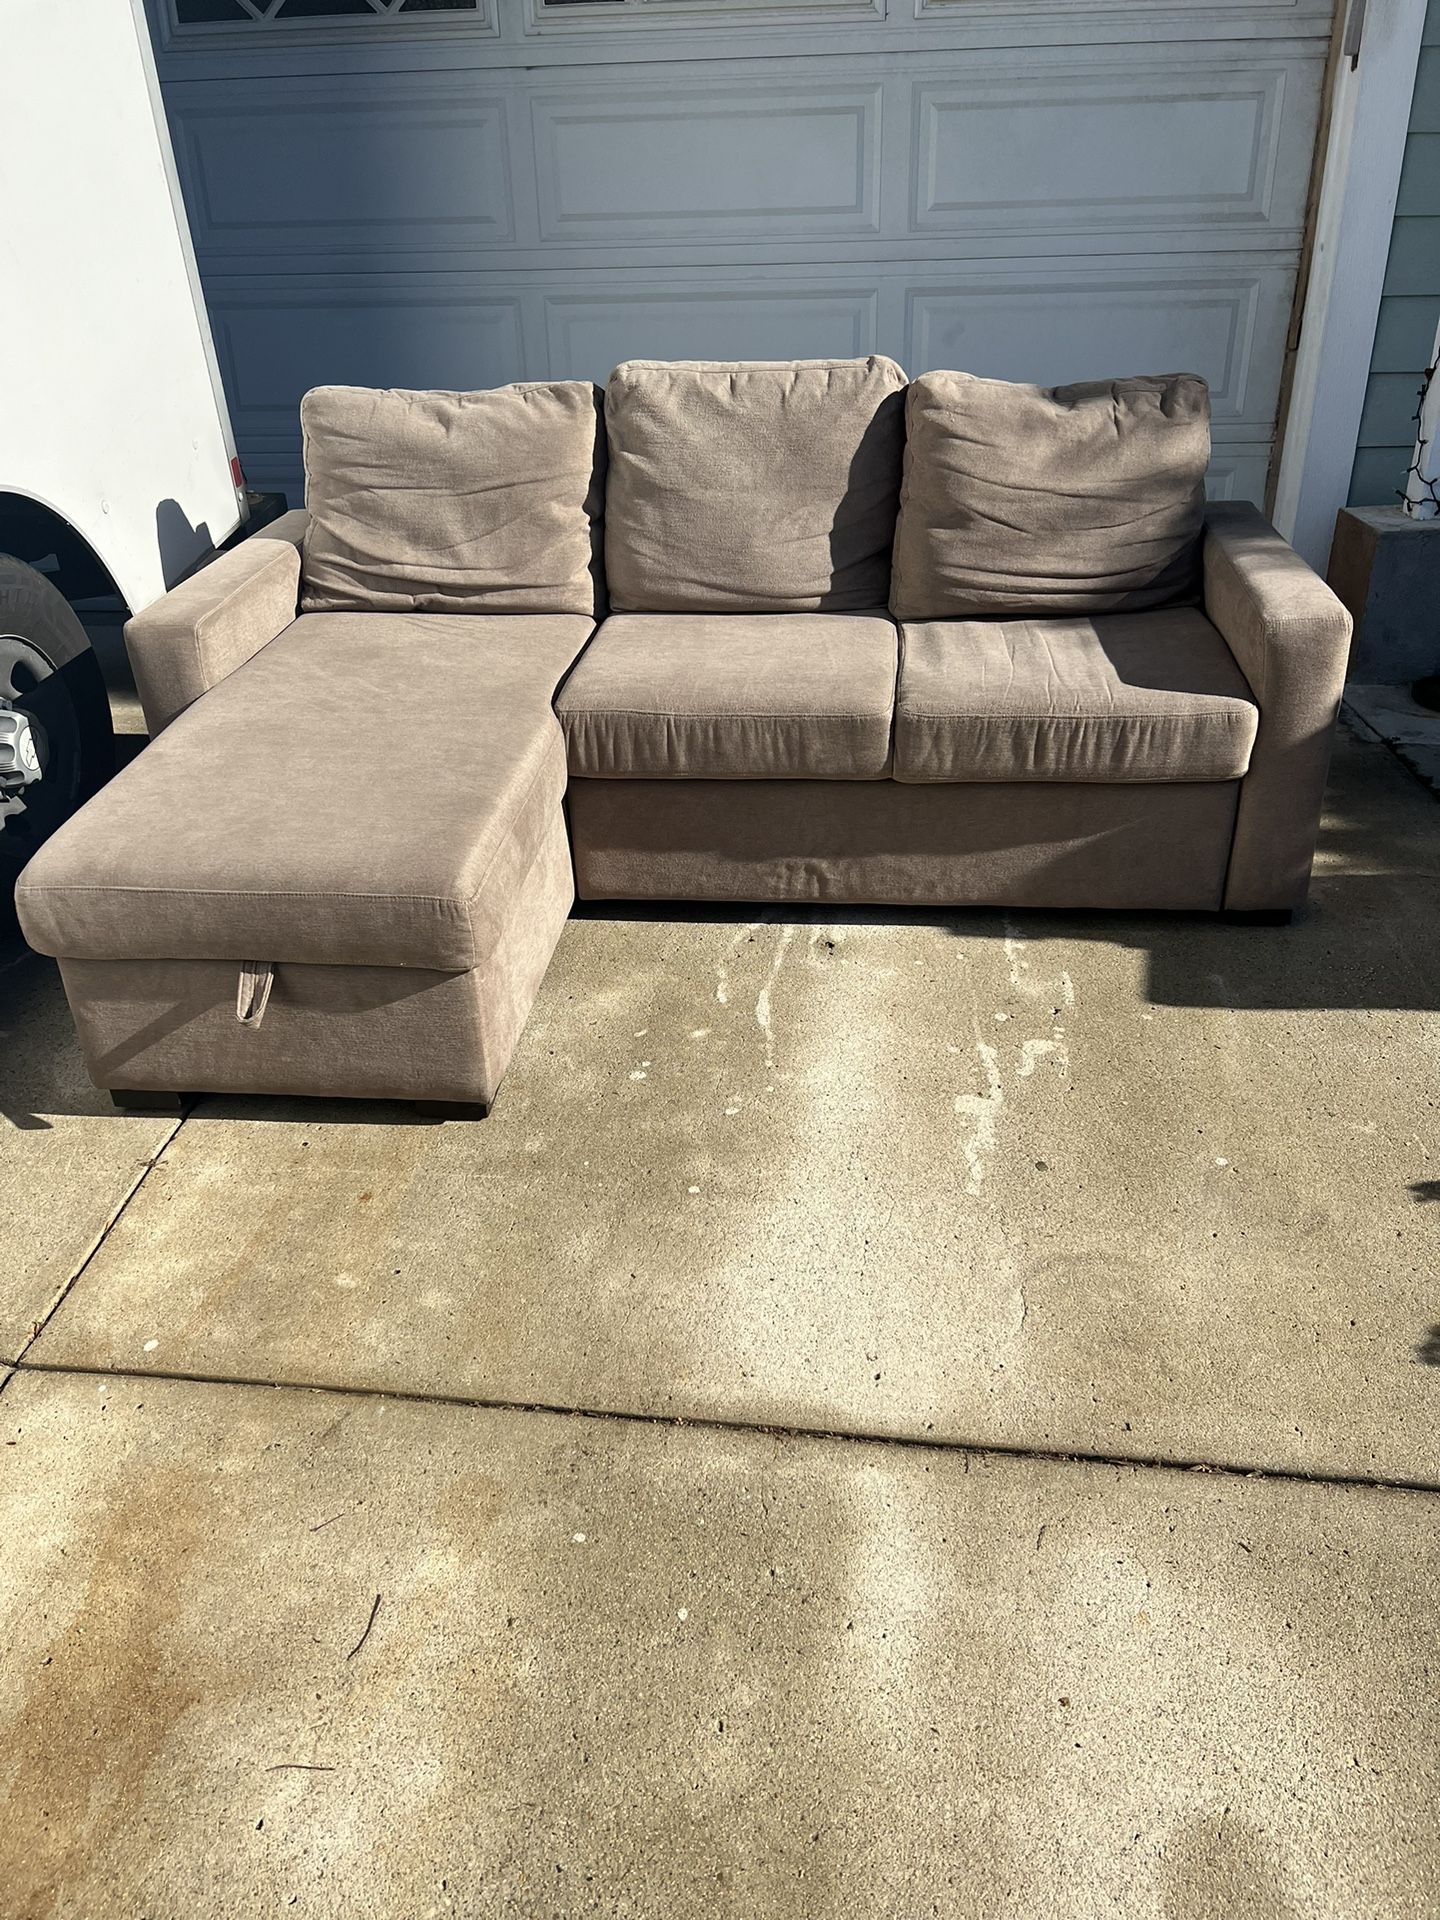 SECTIONAL COUCH + DELIVERY (small Fee)